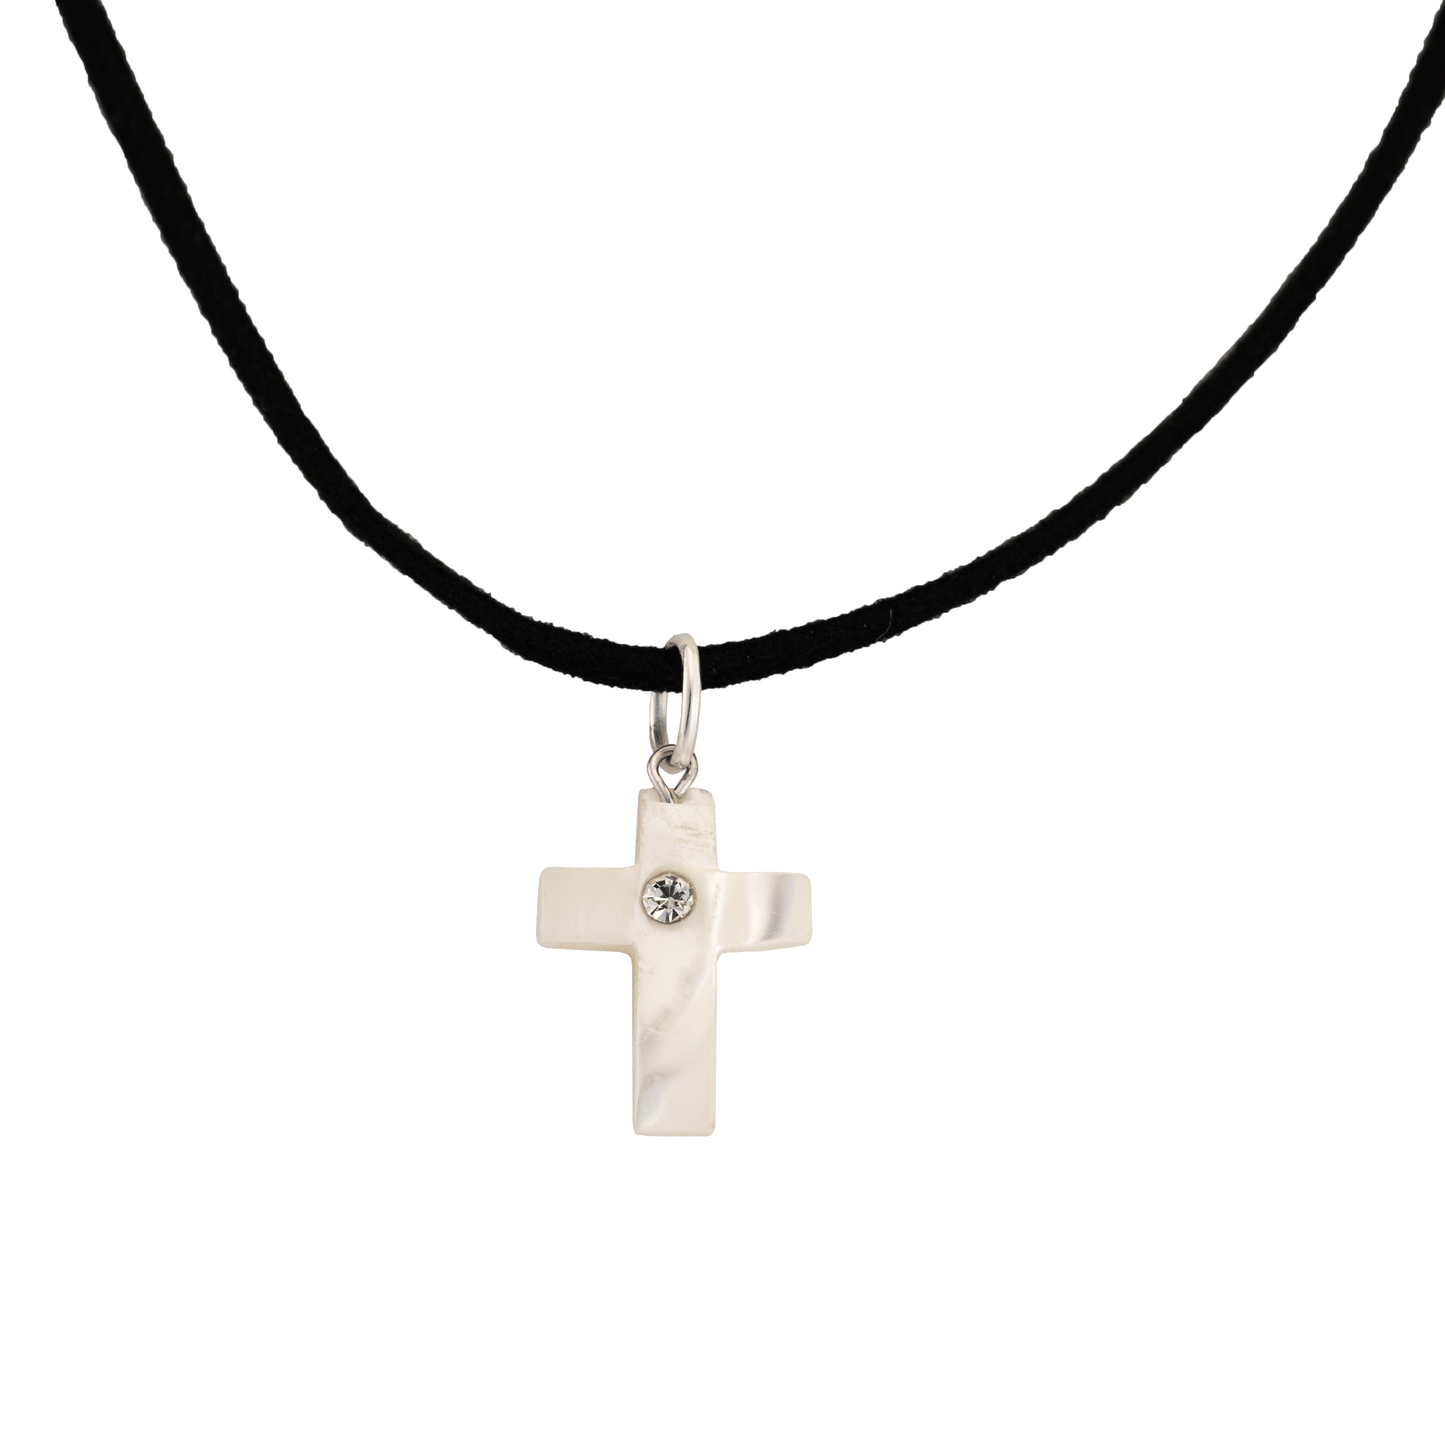 Mother of pearl carved cross pendant and gem in the center with silver bail on black cord